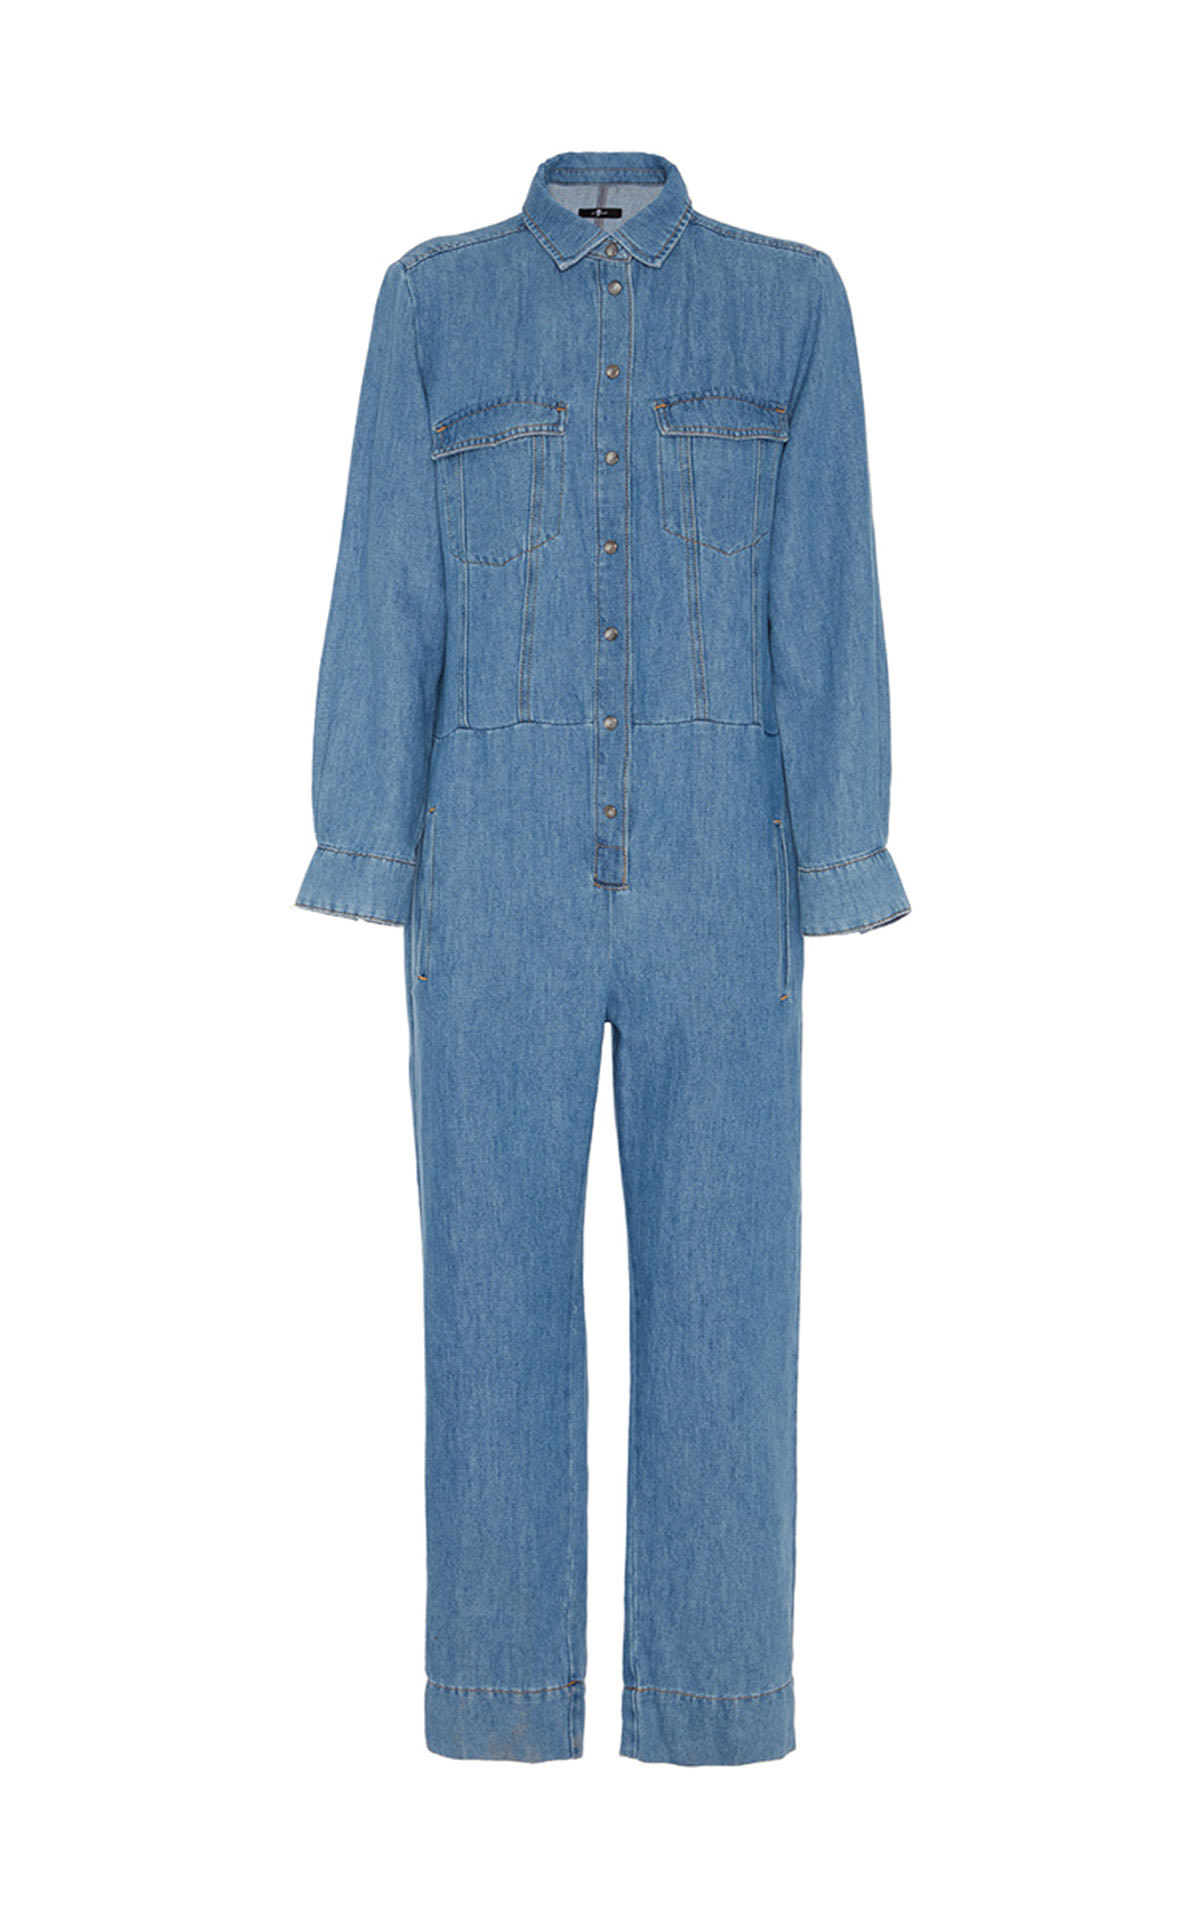 7 For All Mankind Jumpsuit drift away from Bicester Village